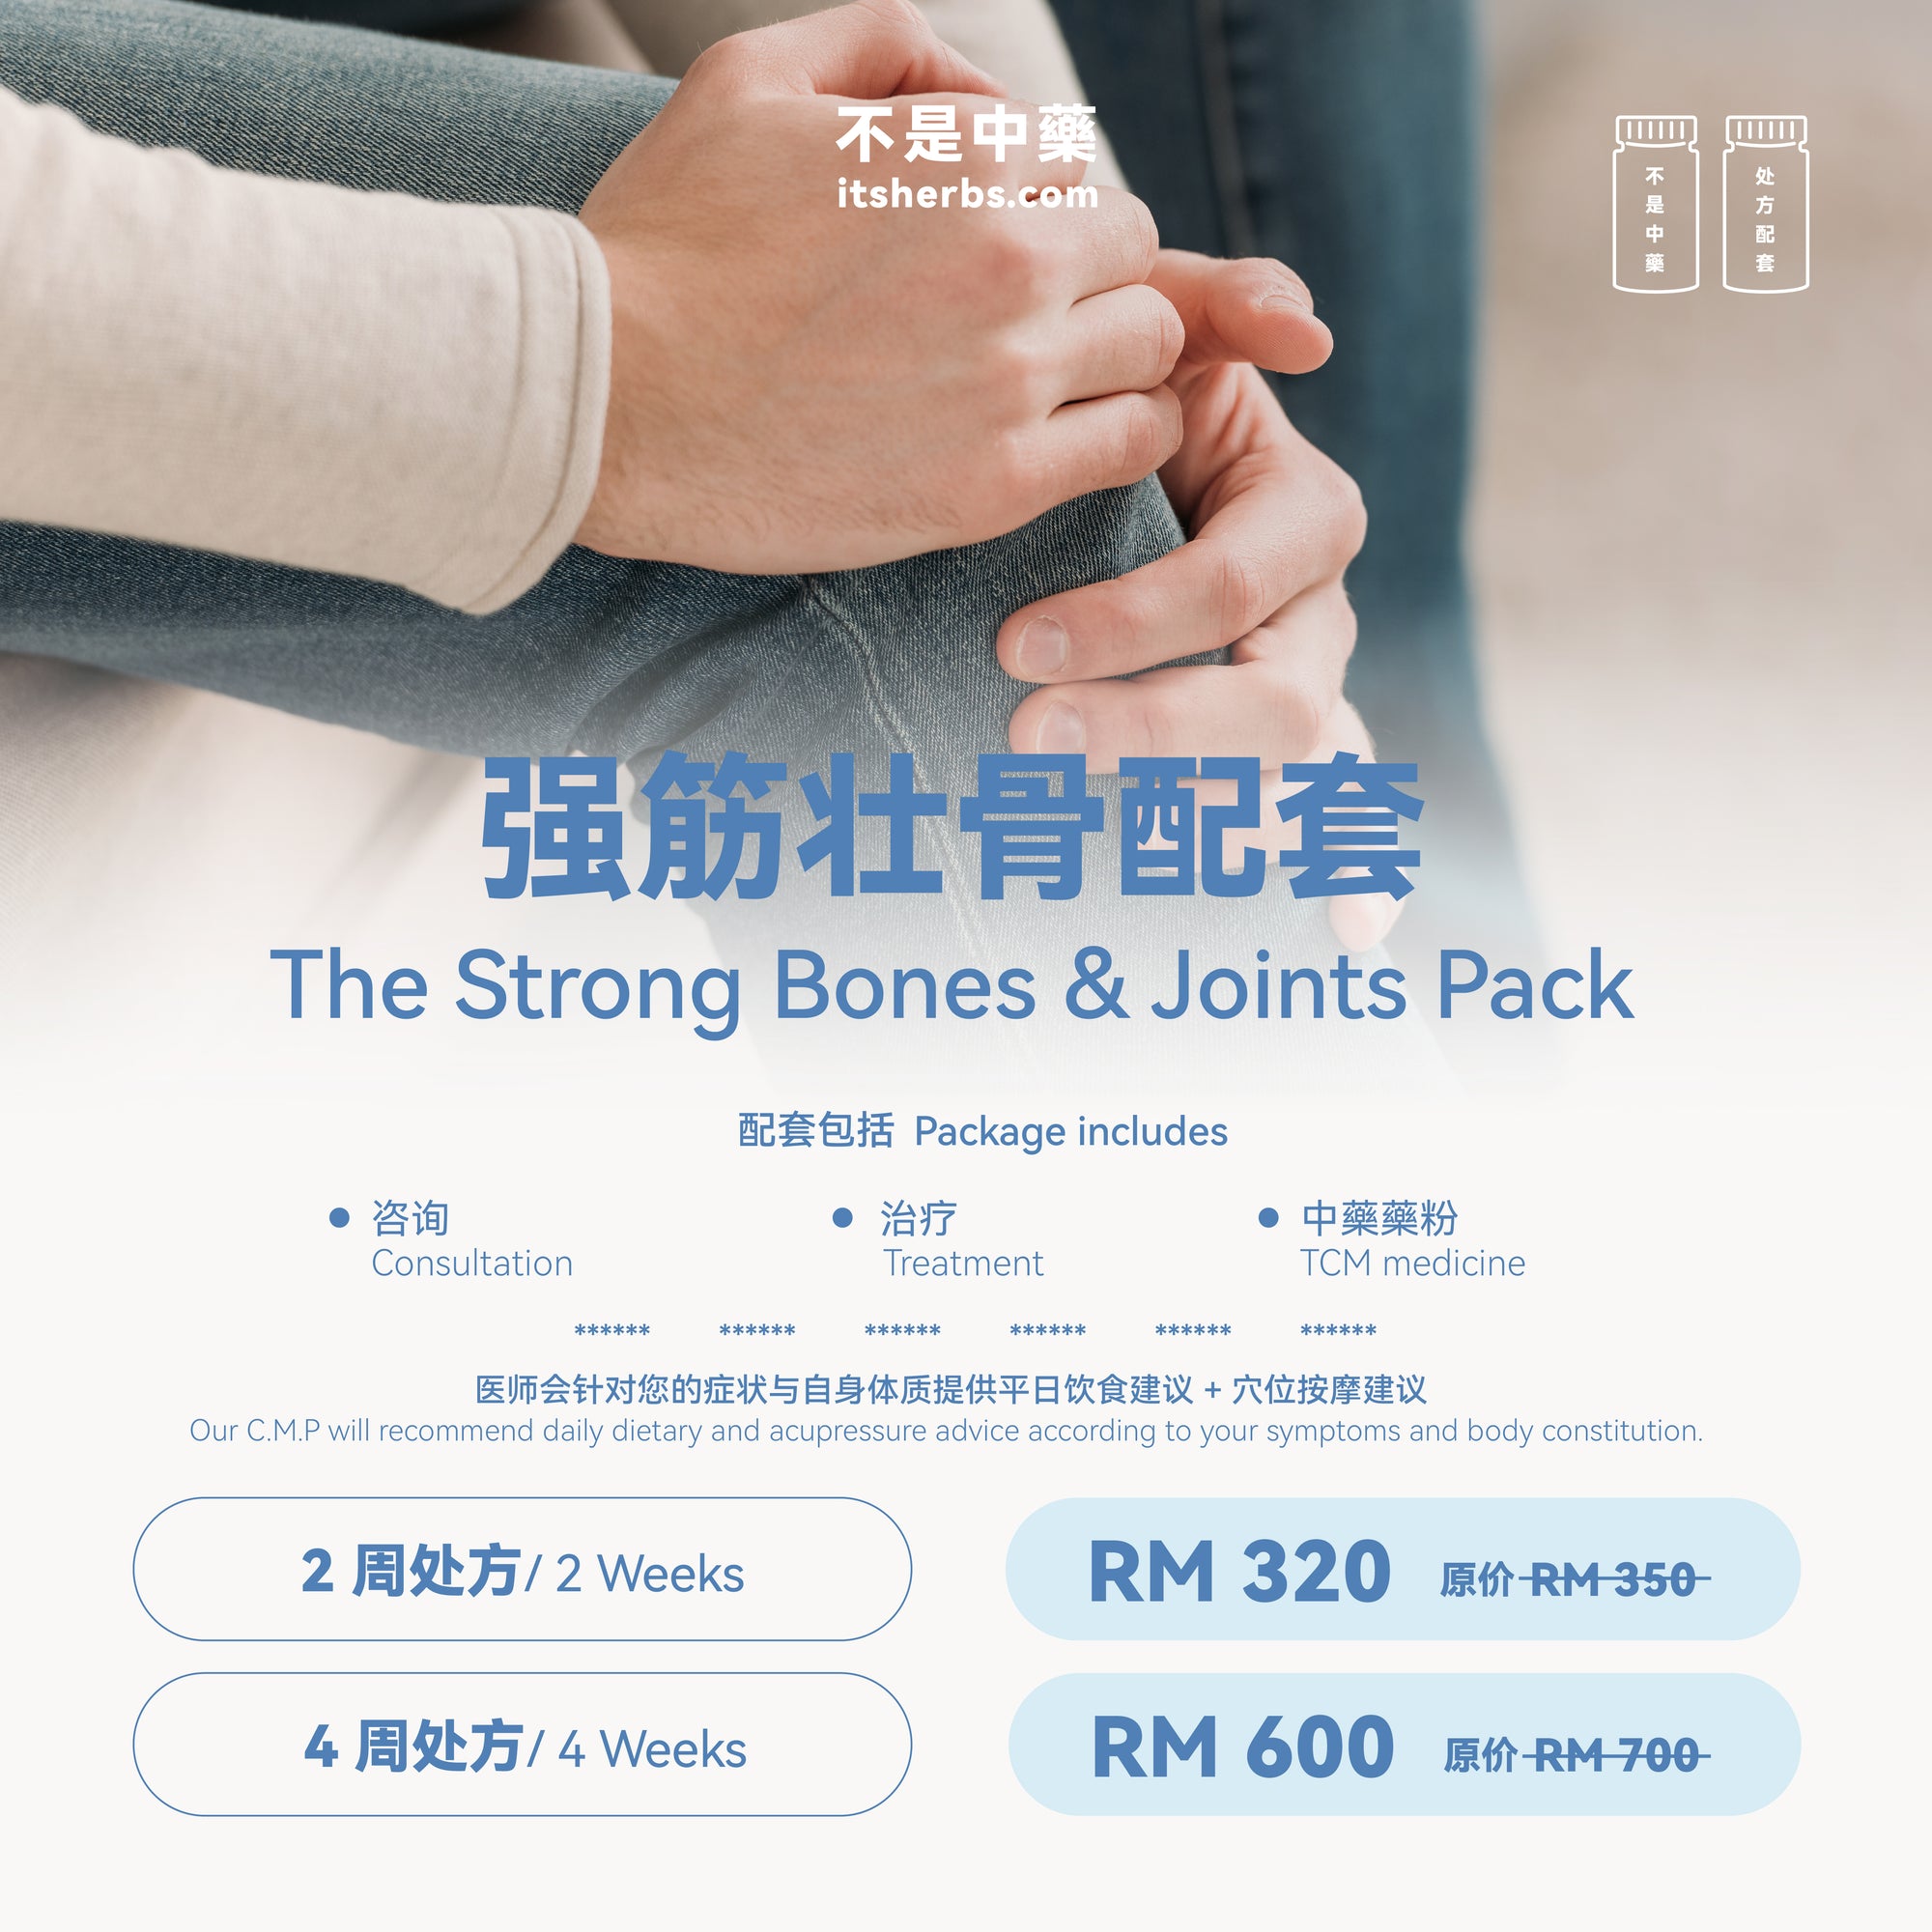 The Strong Bones & Joints Pack